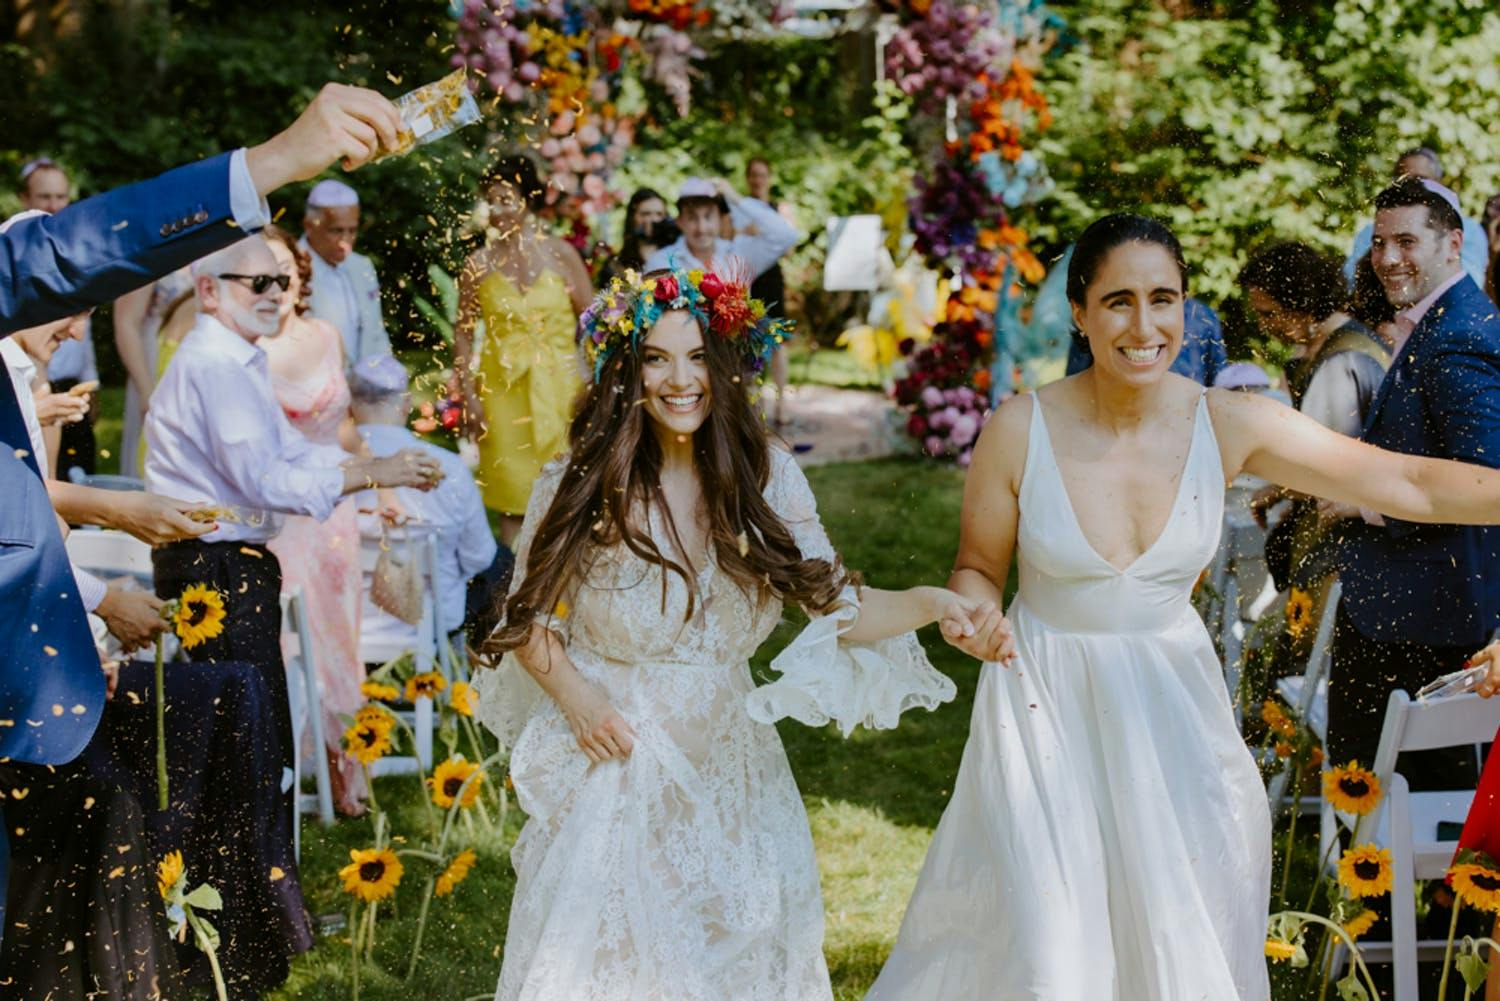 Two women walk down aisle during recessional at outdoor garden wedding | PartySlate